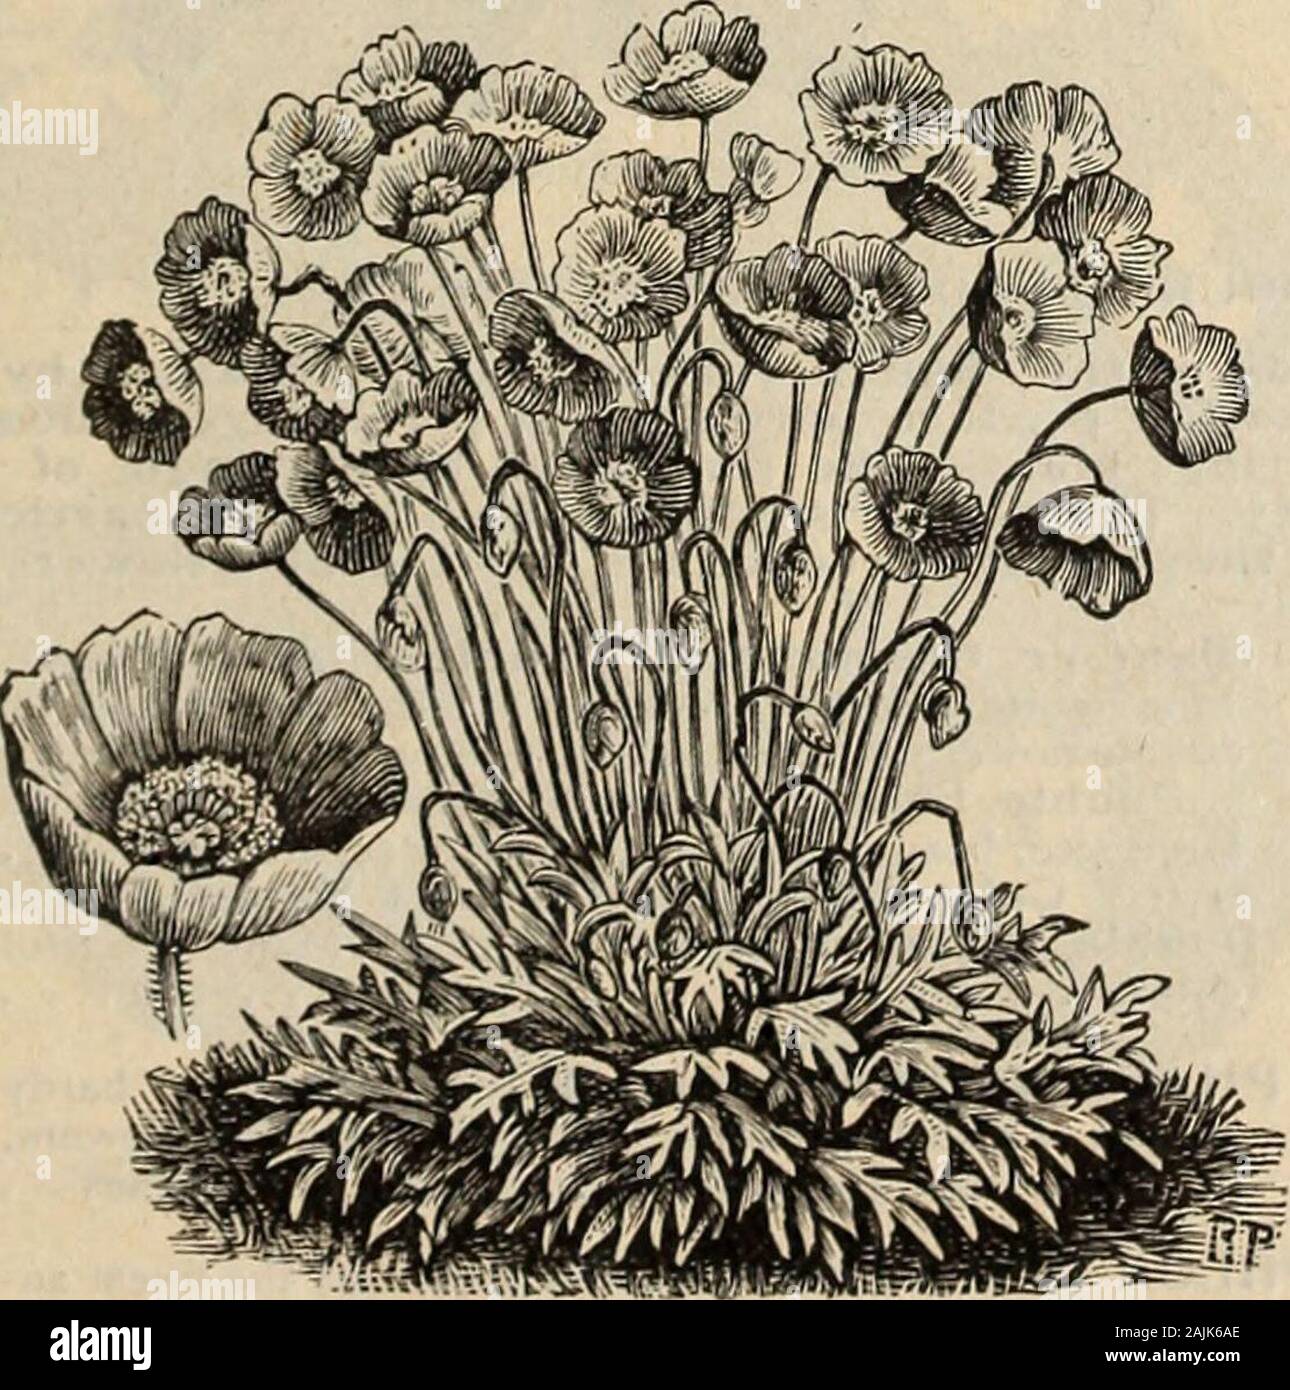 Farquhar's catalogue of seeds 1900 : plants, bulbs tools fertilizers, sundries . al. Two ft. .05 PAPAVER, OR POPPY, Perennial Varieties. • Showy hardy perennials with brilliant flowers suitablefor borders and clumps among shrubs. The IcelandPoppy (P. Nudicaule) will bloom the first season ifsown early. All the perennial varieties may be sownin July or August to bloom the following summer.6215 Collection of Six Perennial Varieties. All hardy .306220 Alpinum. (Alpine Poppy.) Finest Mixed.Charming dwarf Poppies with brilliant flowers of manycolors, including pure white, yellow, orange, rose and s Stock Photo